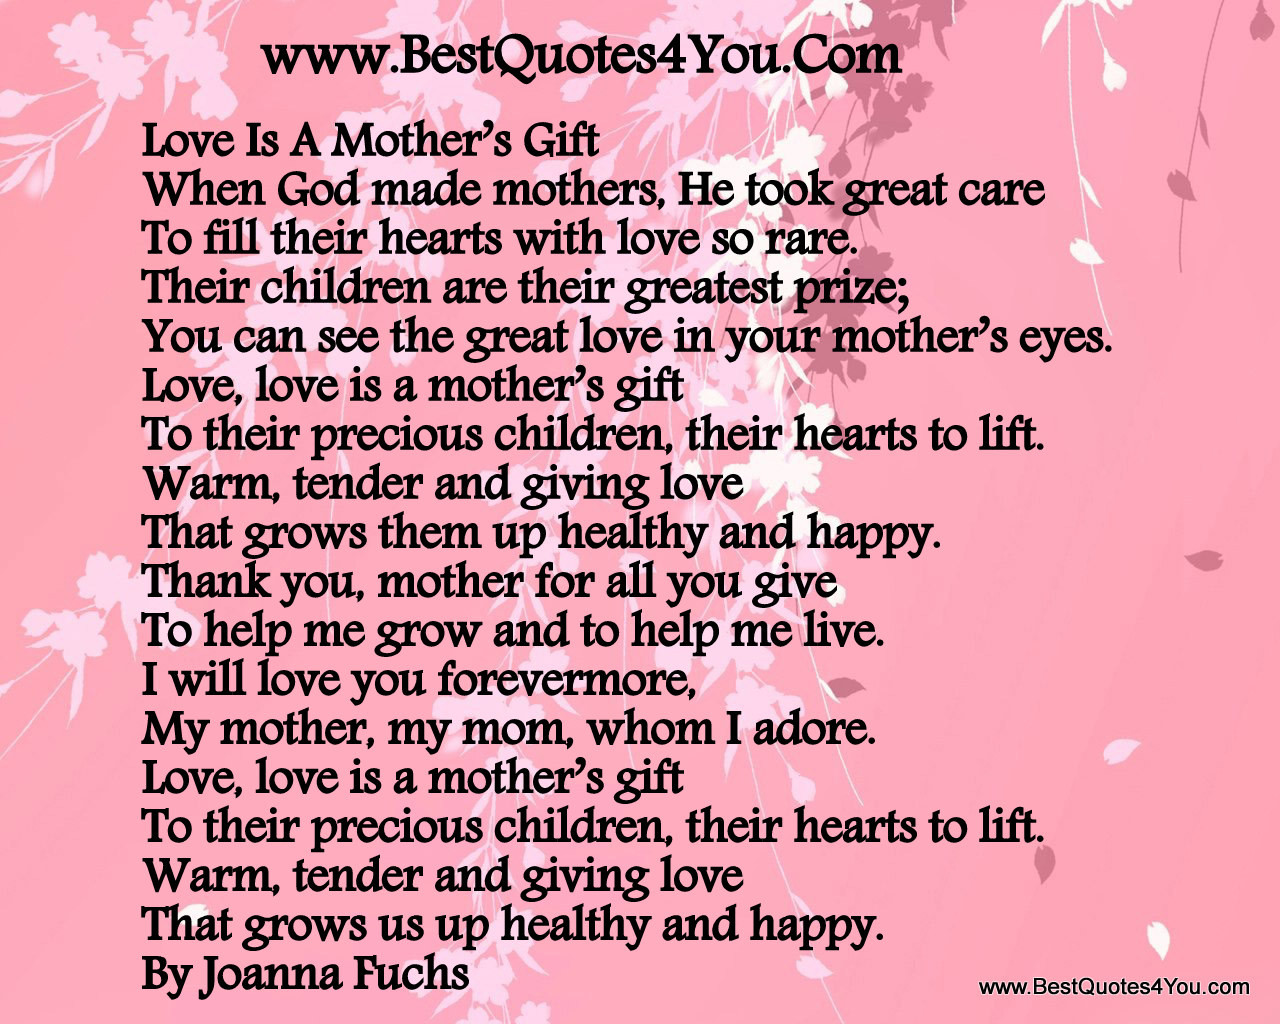 Quotes For Mothers Birthdays
 Birthday Quotes For Your Mother QuotesGram